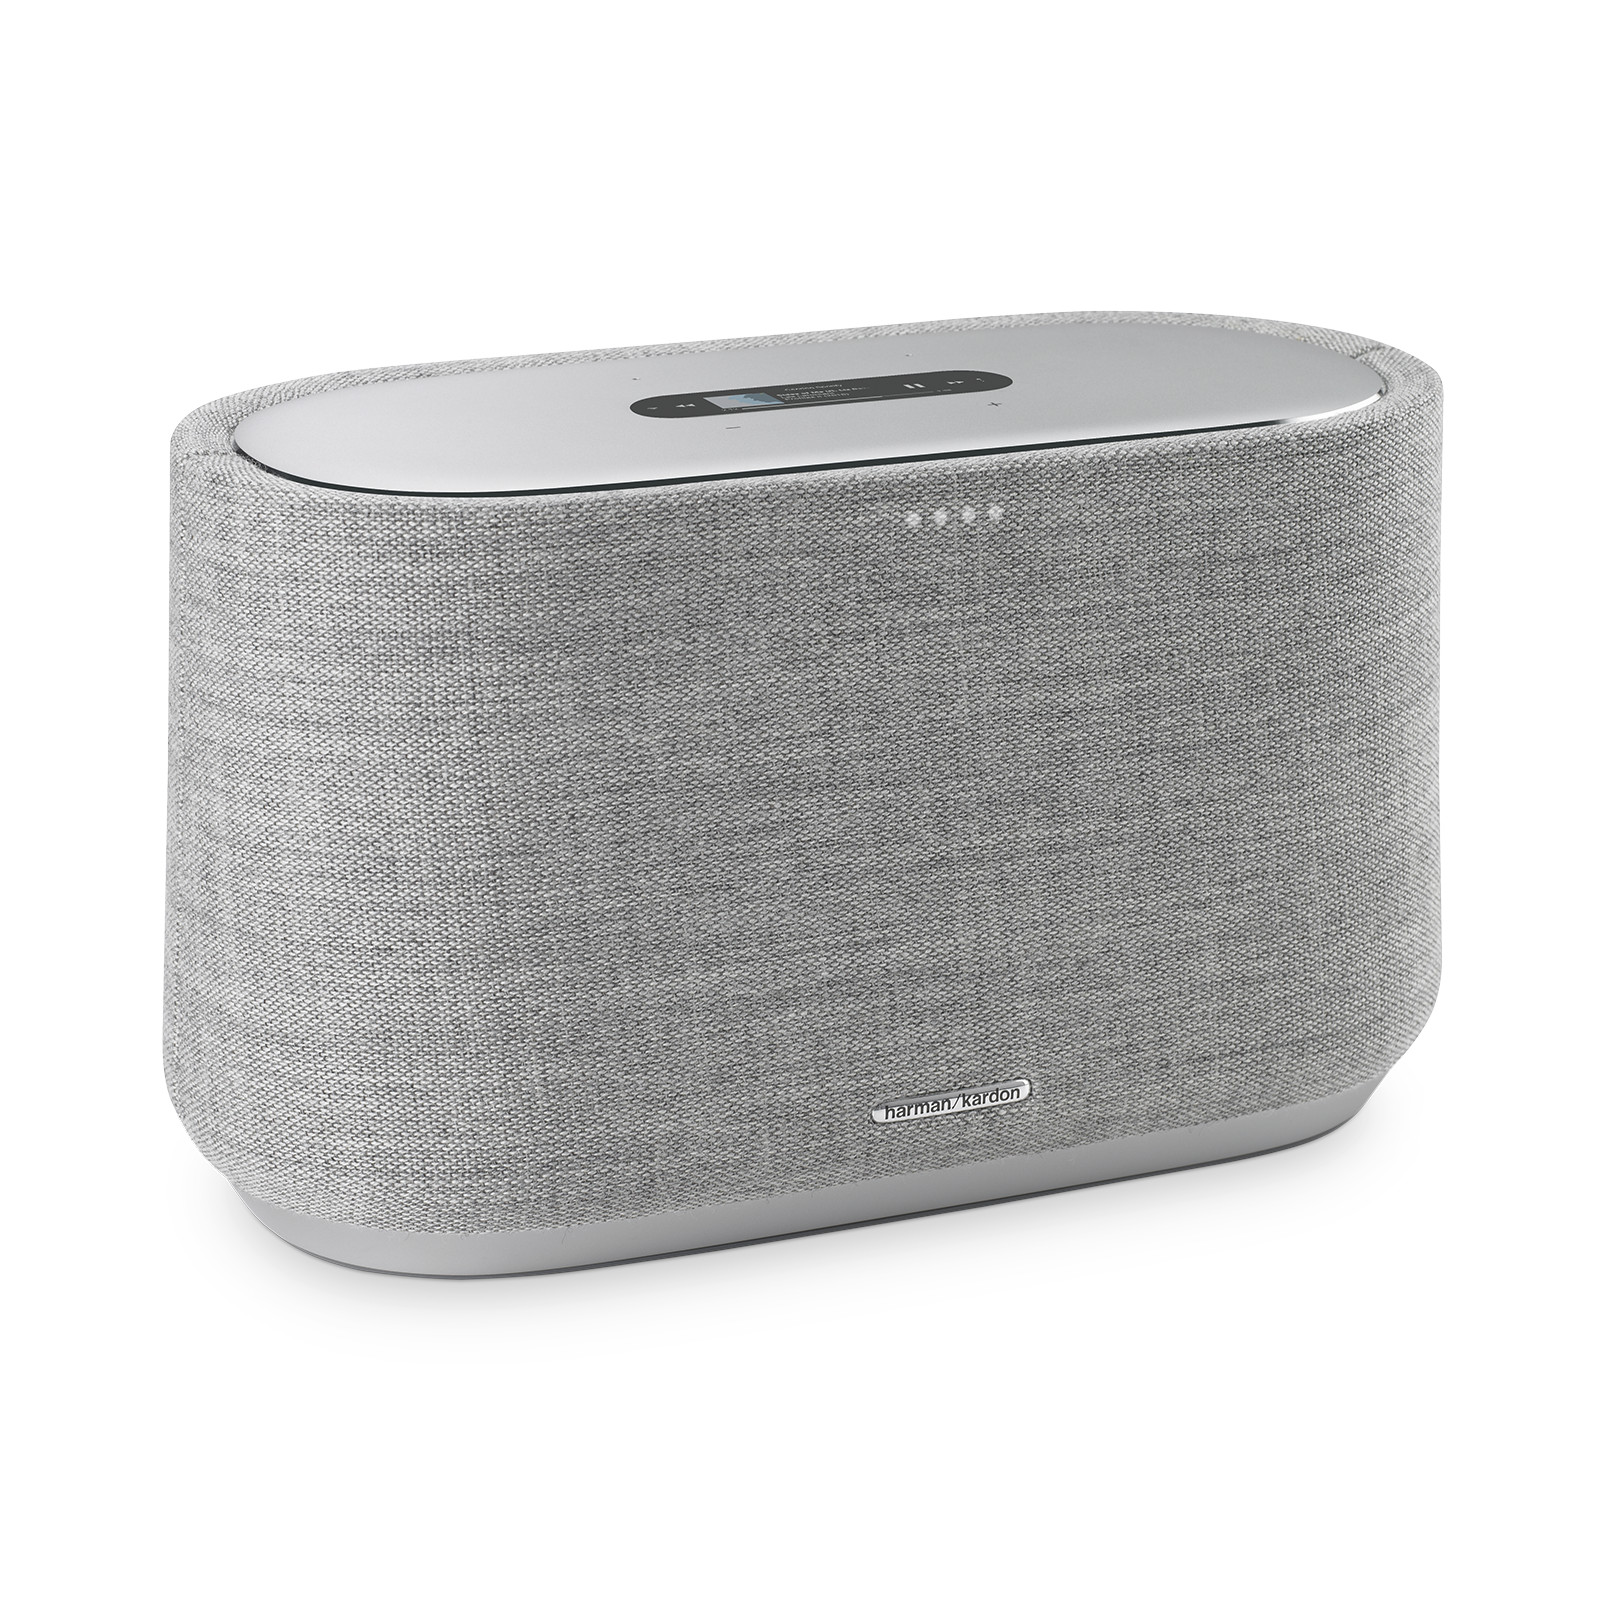 Citation 300, Voice-activated speaker with Google Assistant, LCD